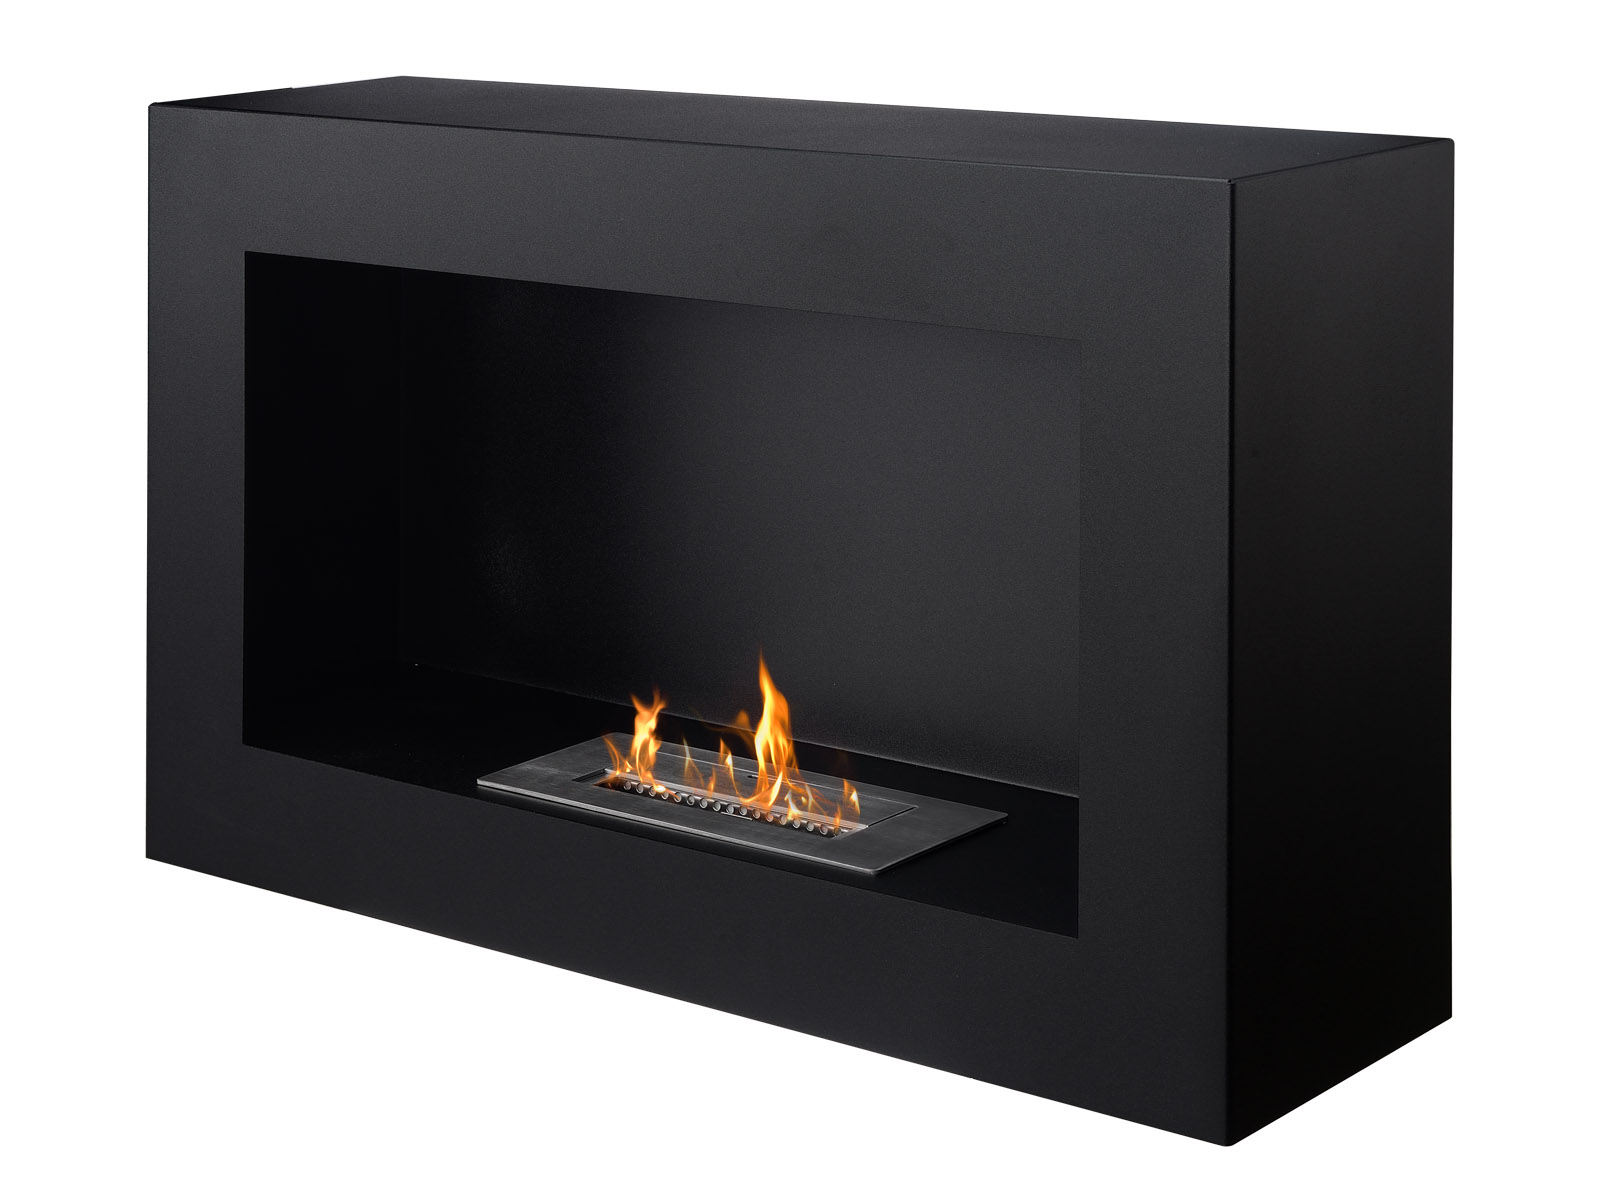 Gel and Ethanol Fireplace Cheminee Camino Paris Deluxe Royal Choose the color 